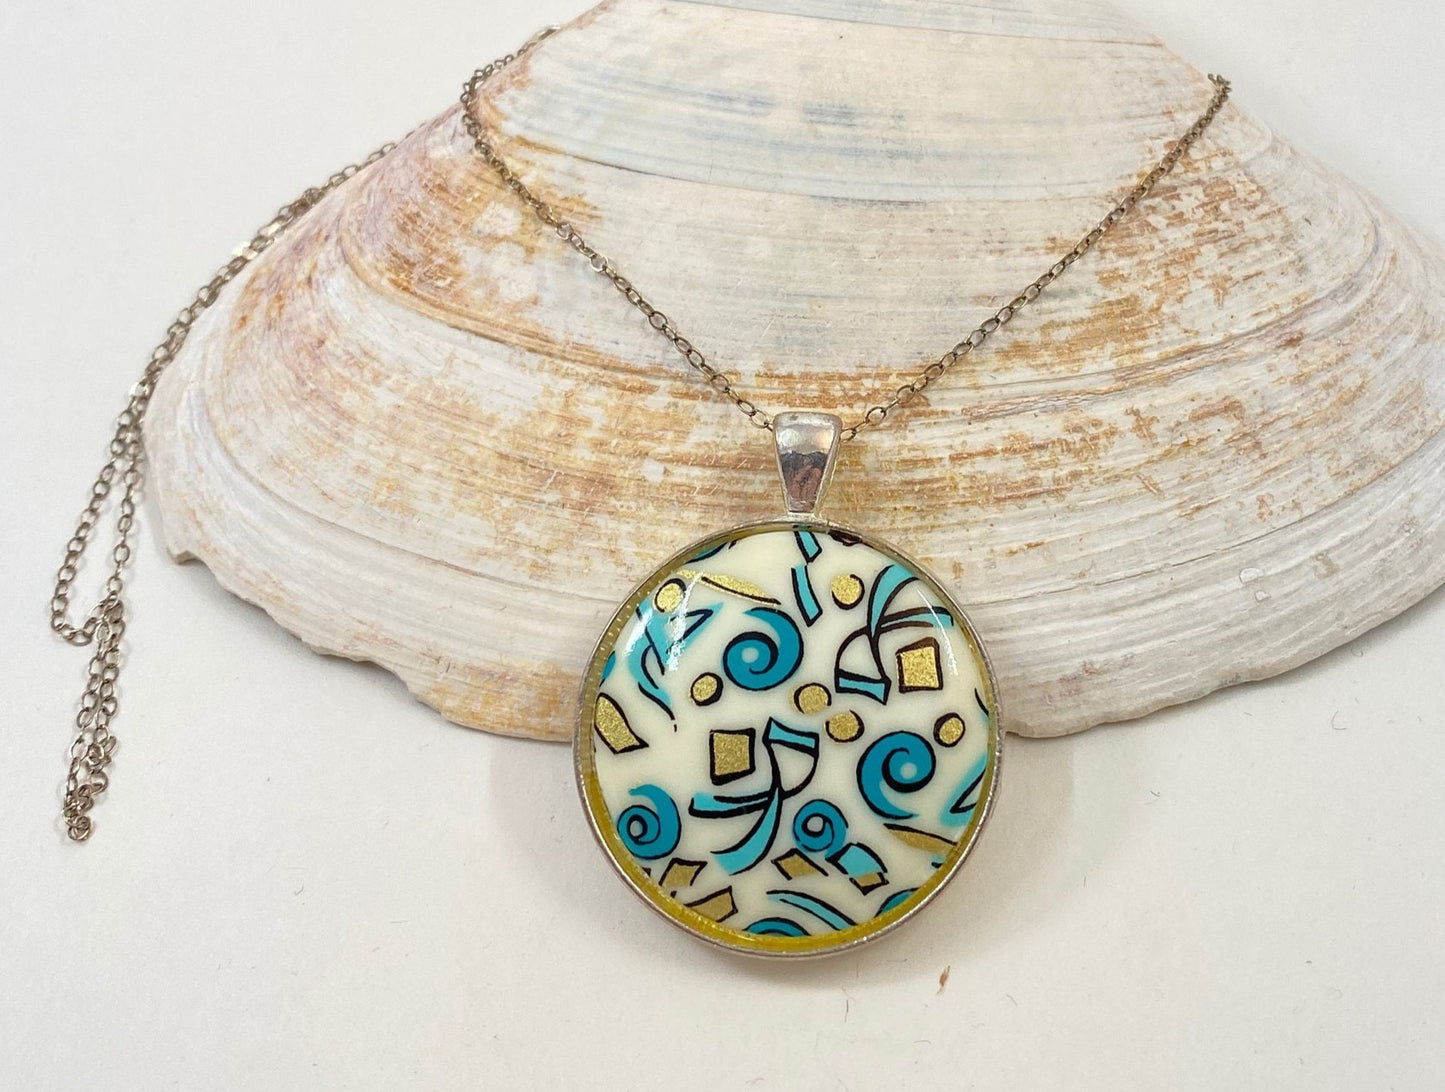 Beautiful retro look pendant.  Set in a silver bezel on a sterling silver chain. Blue and gold fun design.